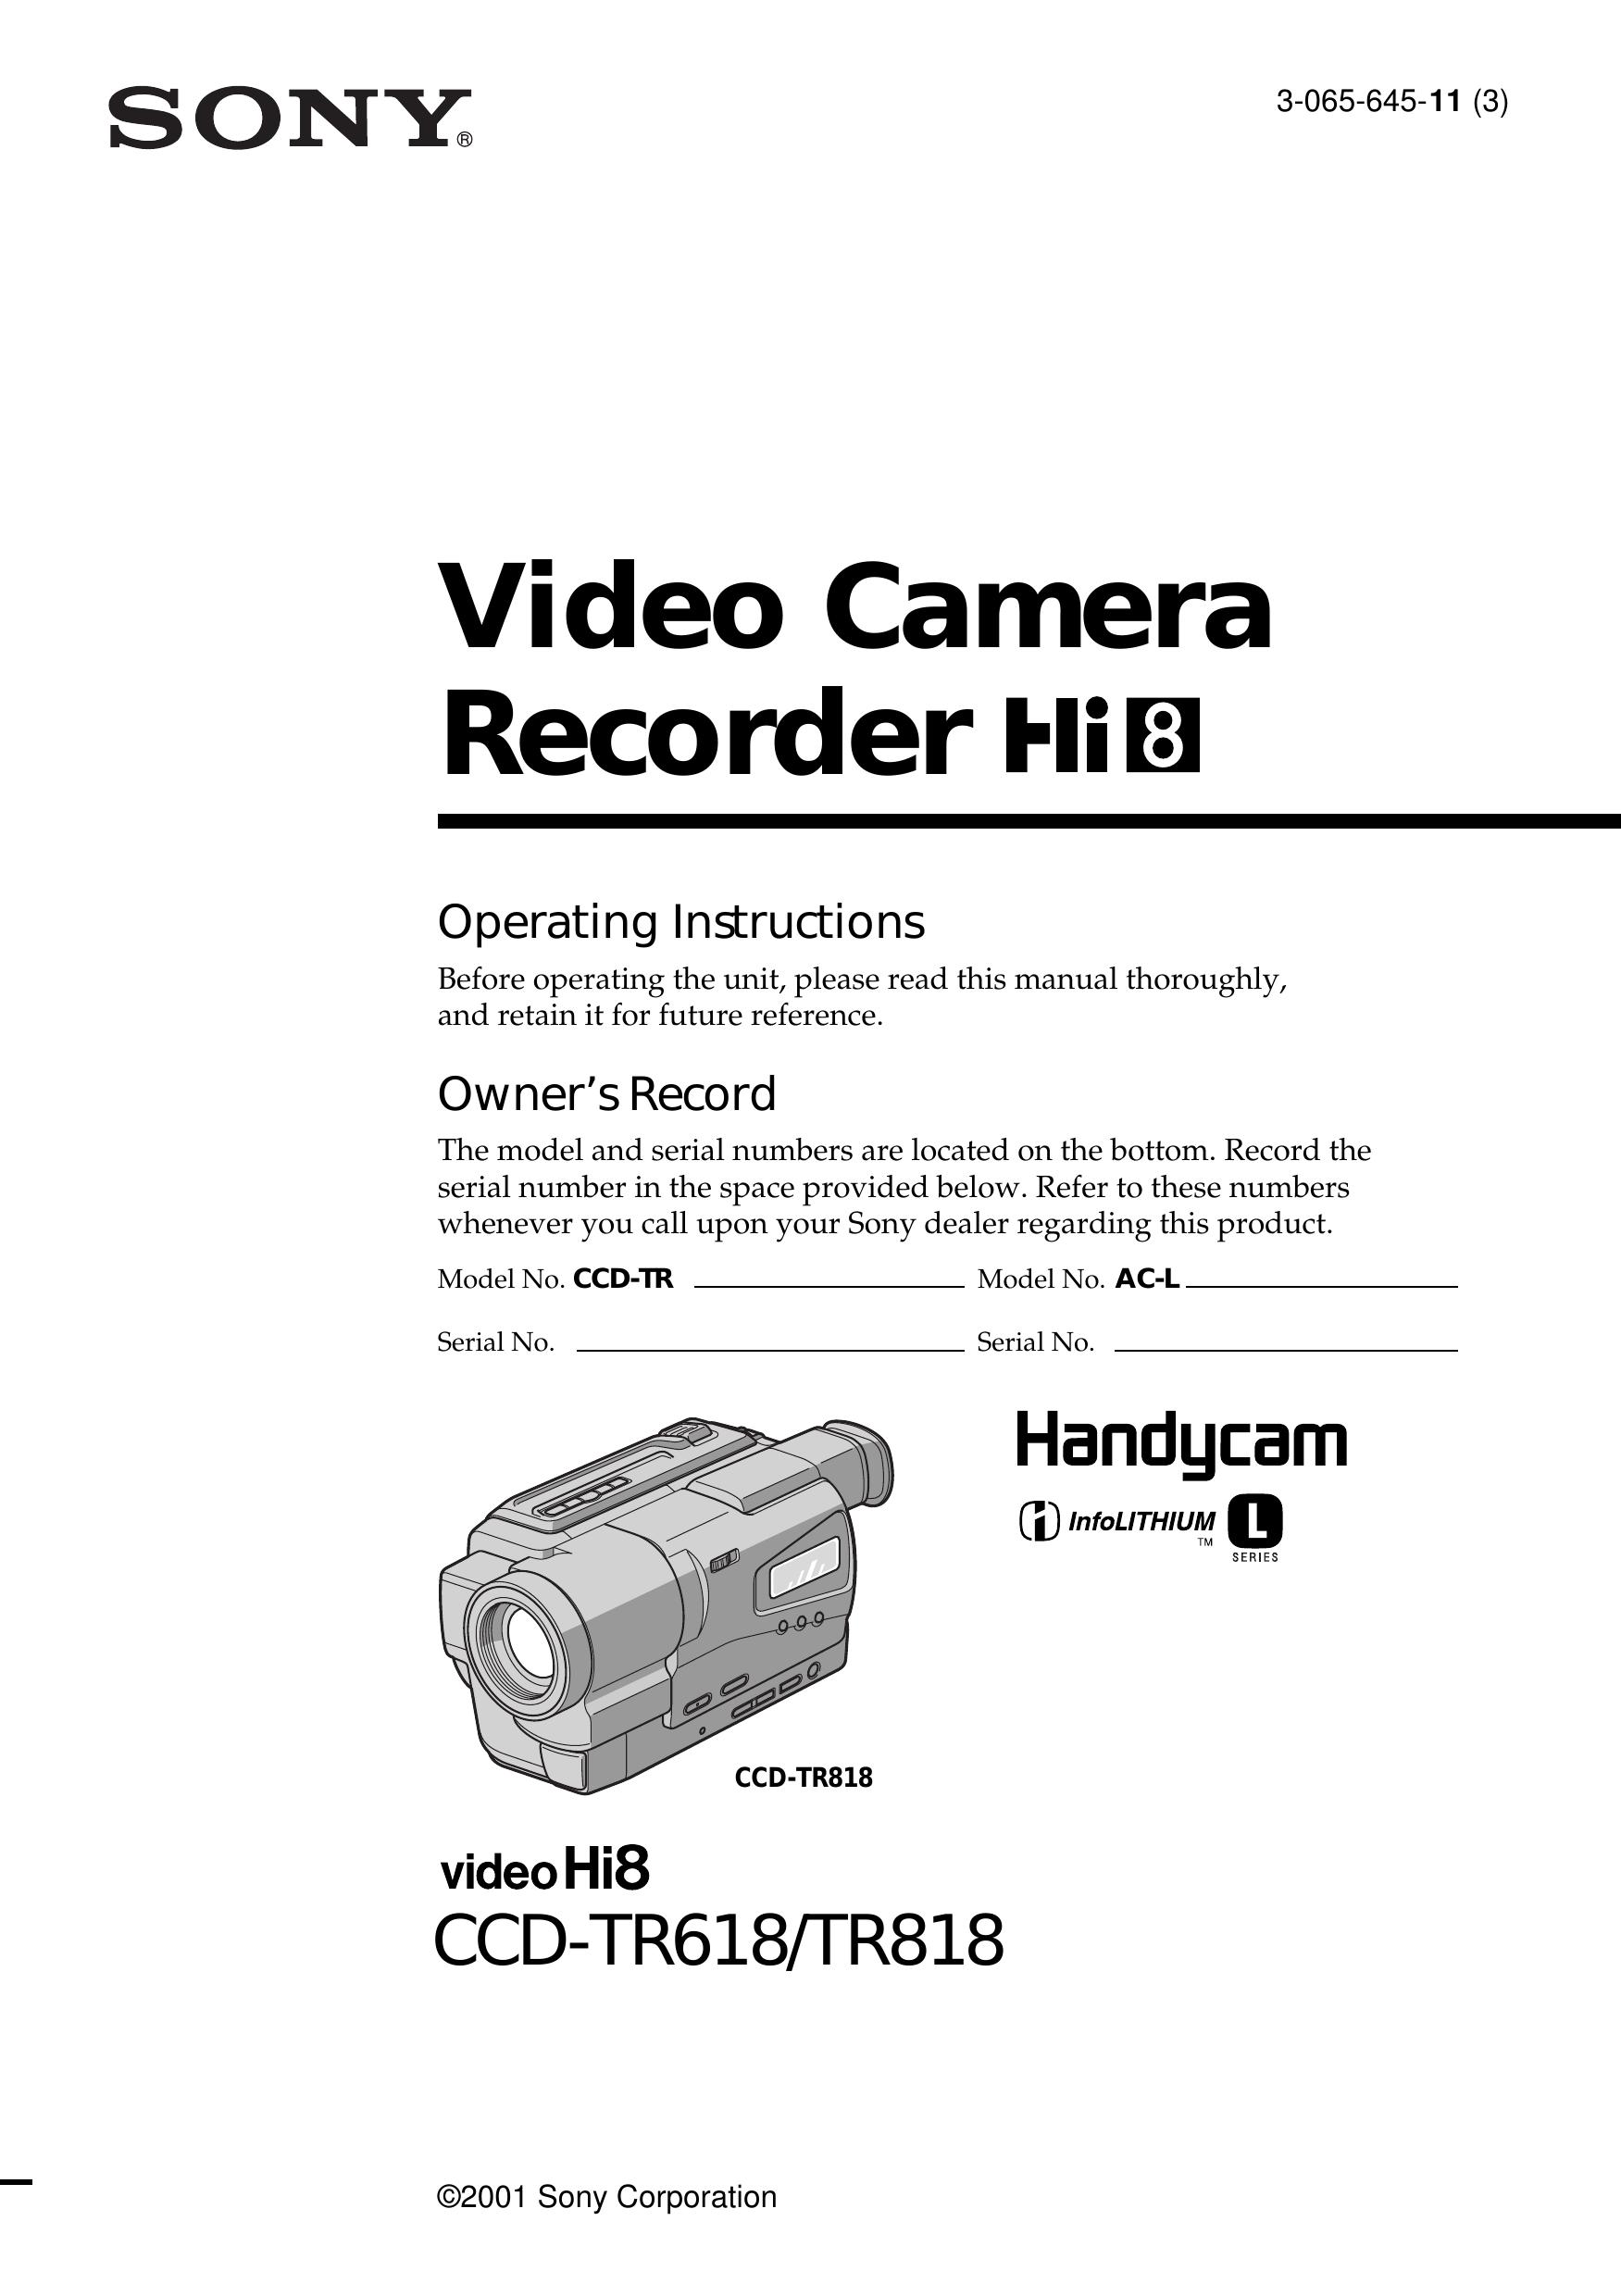 Sony AC-L Camcorder User Manual